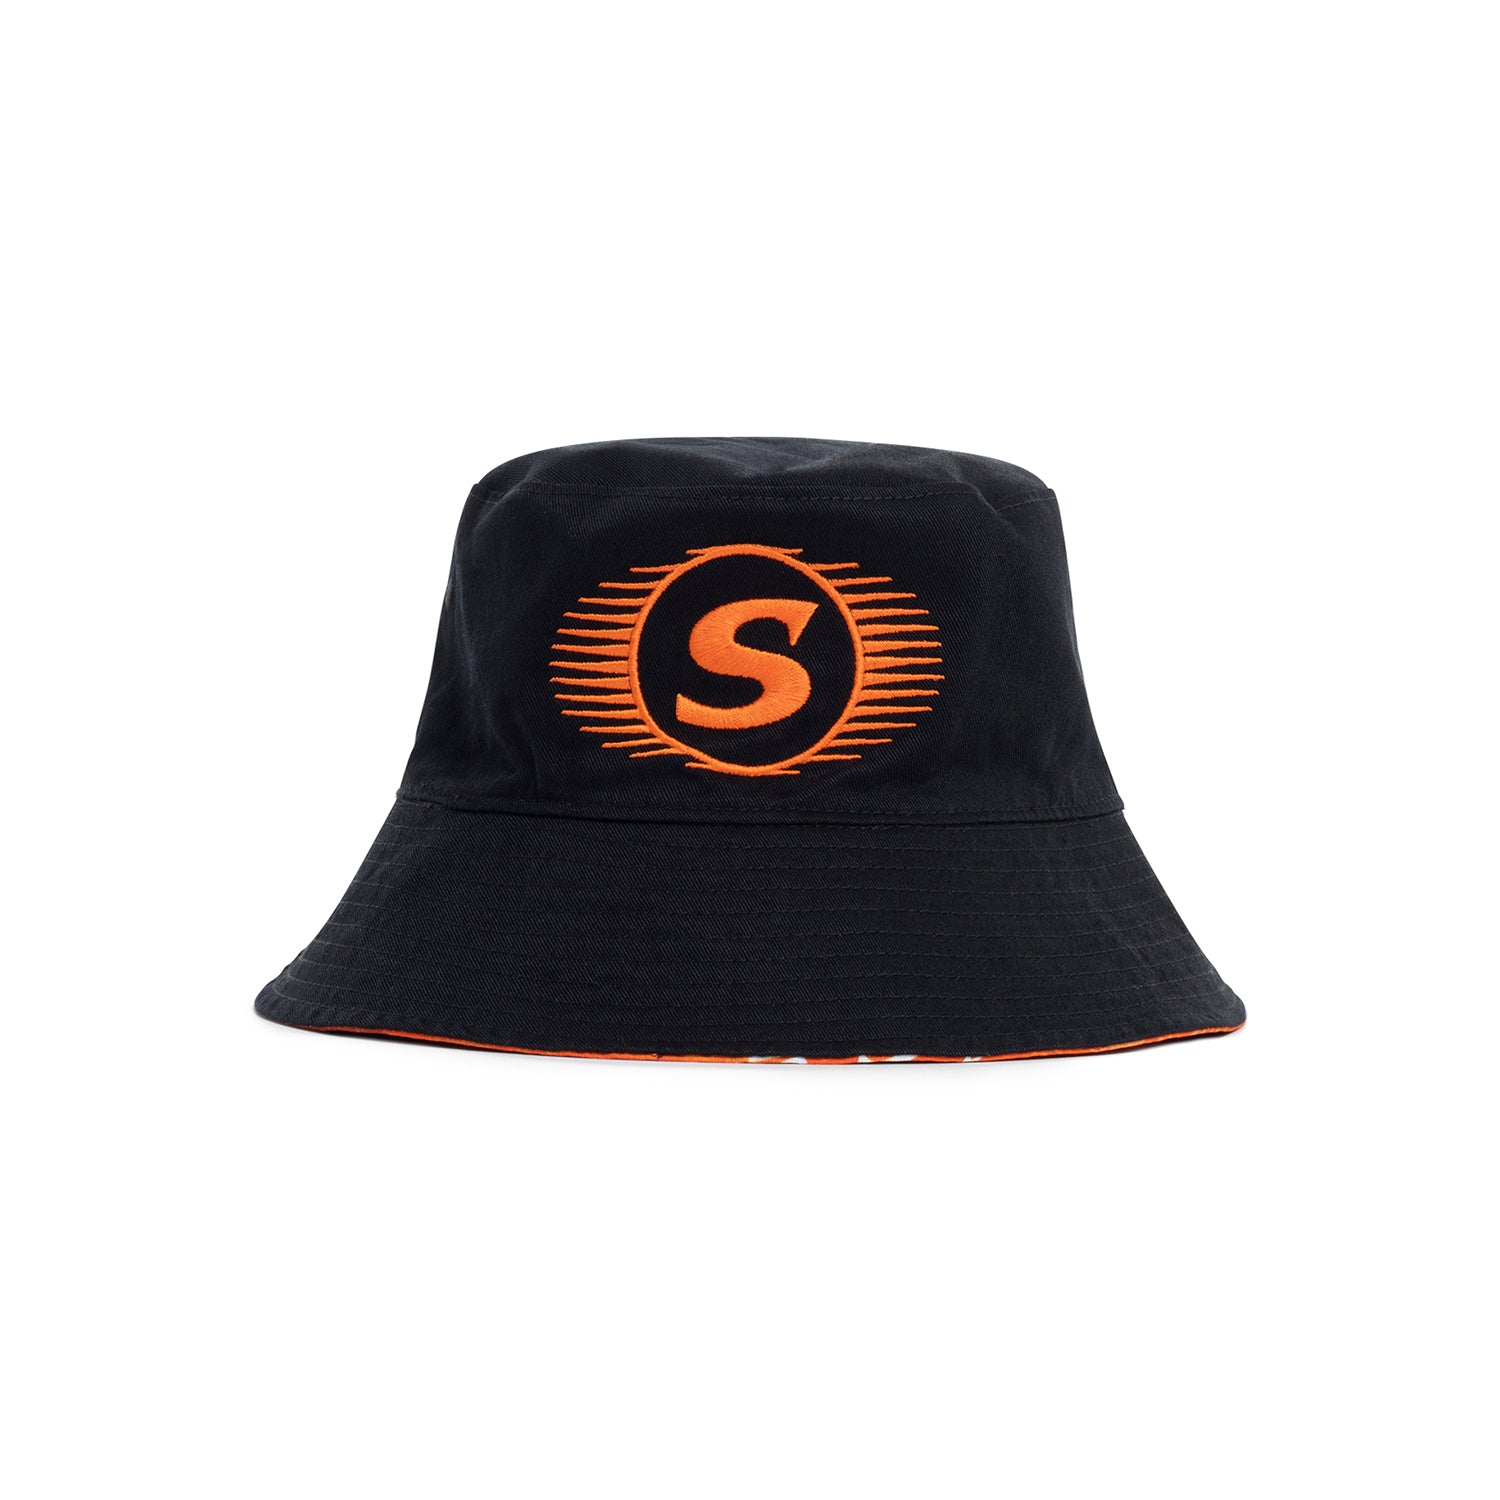 Perth Scorchers Hat, Excellent Condition, Brand New with Tags